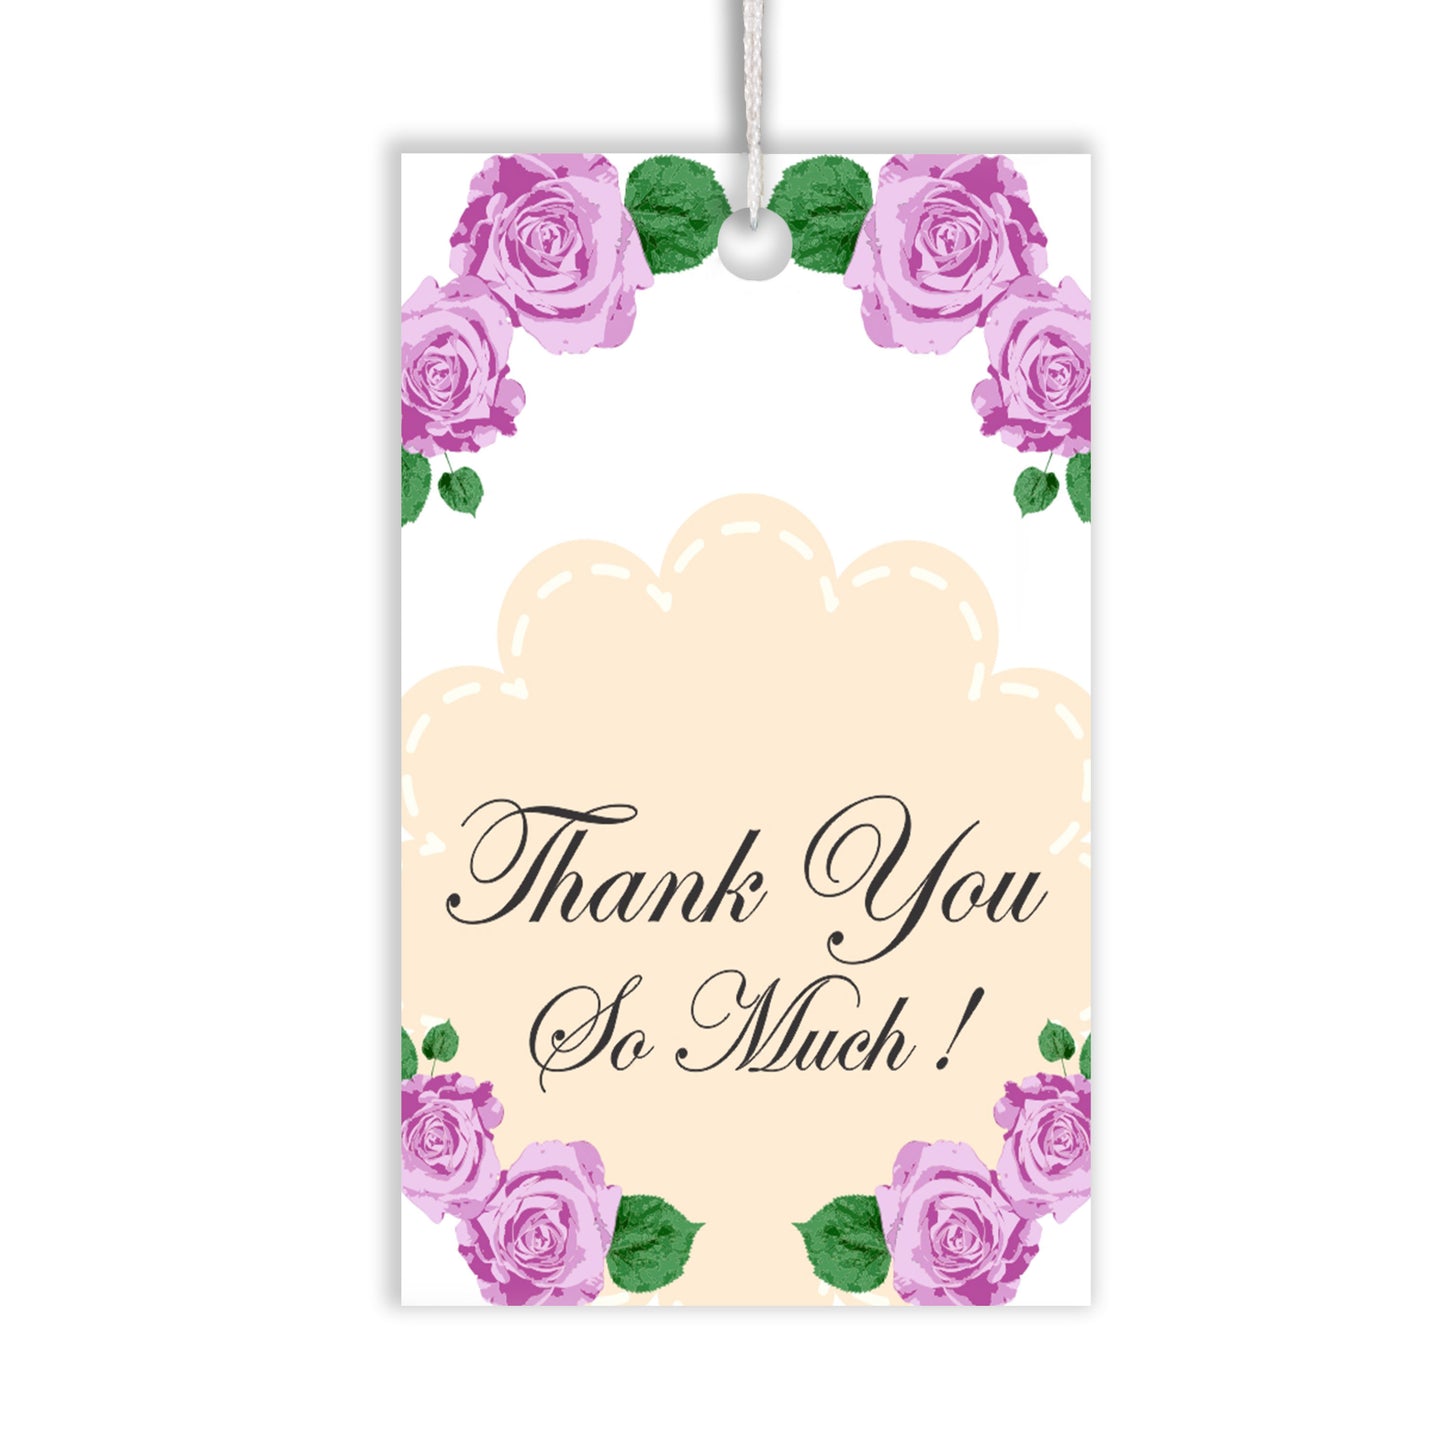 iberry's 100 pcs Thankyou Tags with Thread, Thankyou Tags for Return Gifts, Thankyou Tags for Small Business, Tags for Return Gifts-02